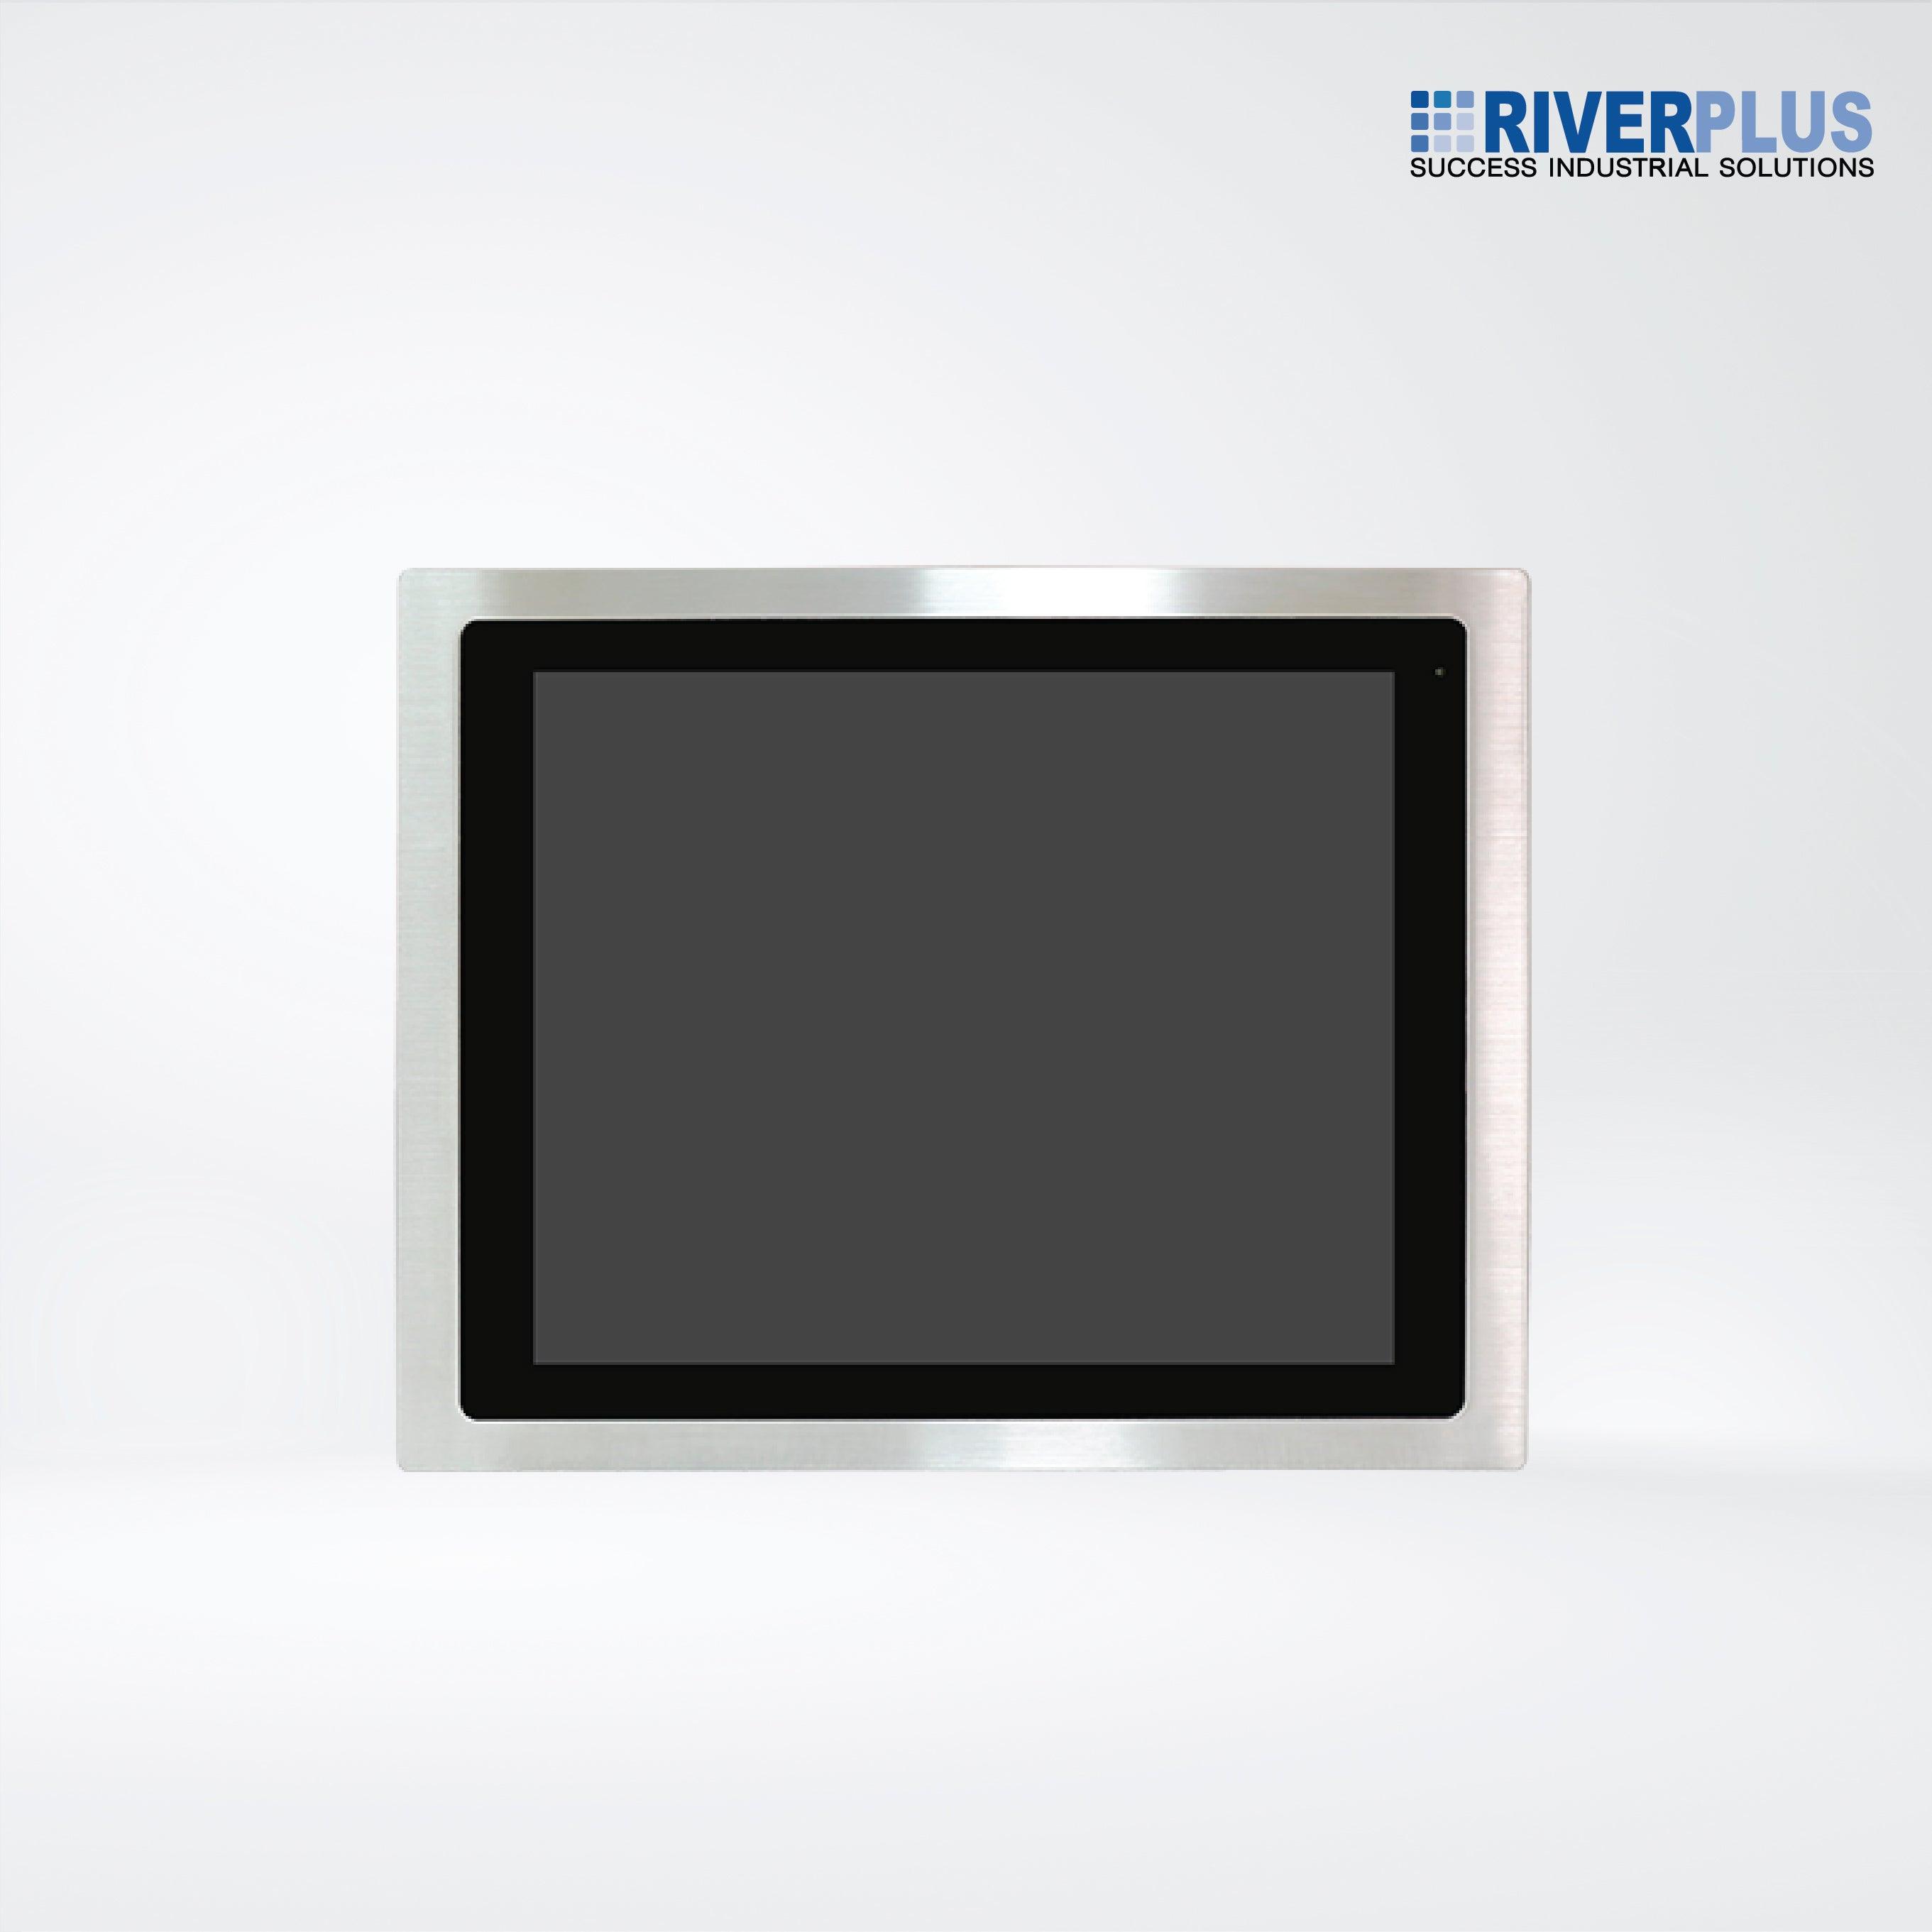 FABS-117RH 17” Flat Front Panel IP66 Stainless Chassis Display - Riverplus